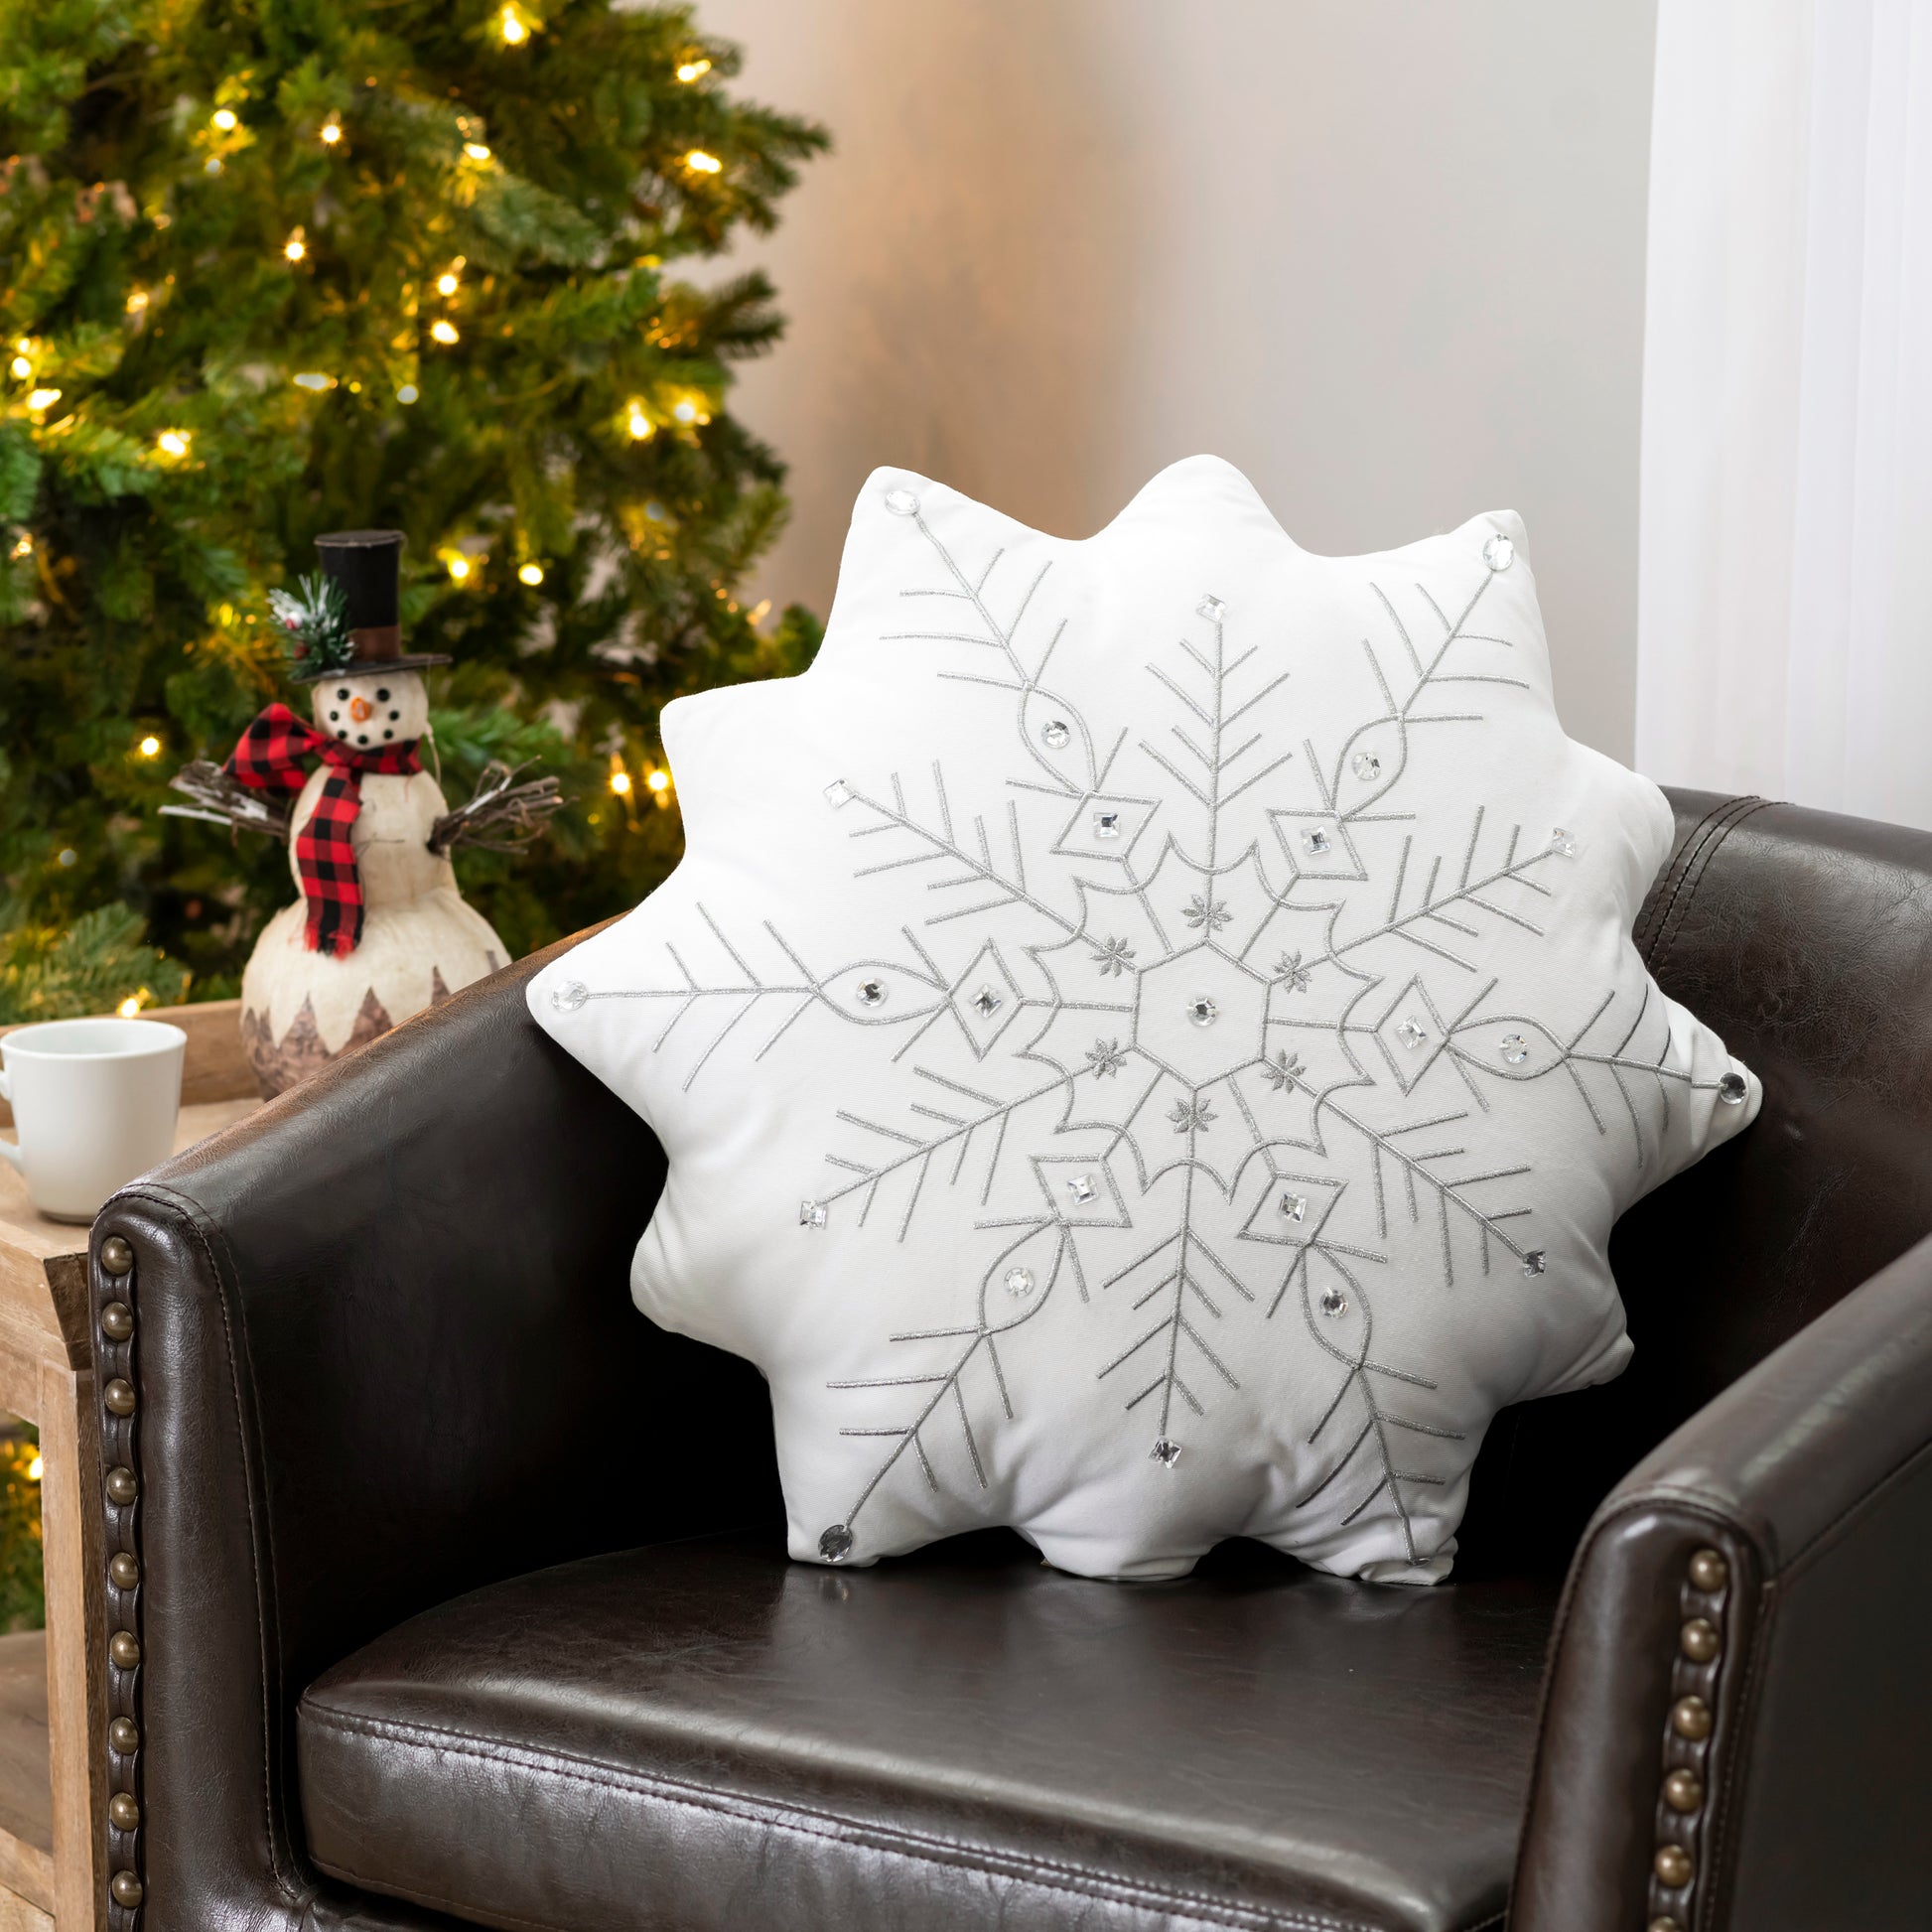 Snowflake Shaped Beaded Large Pillow styled on a holiday themed leather chair.